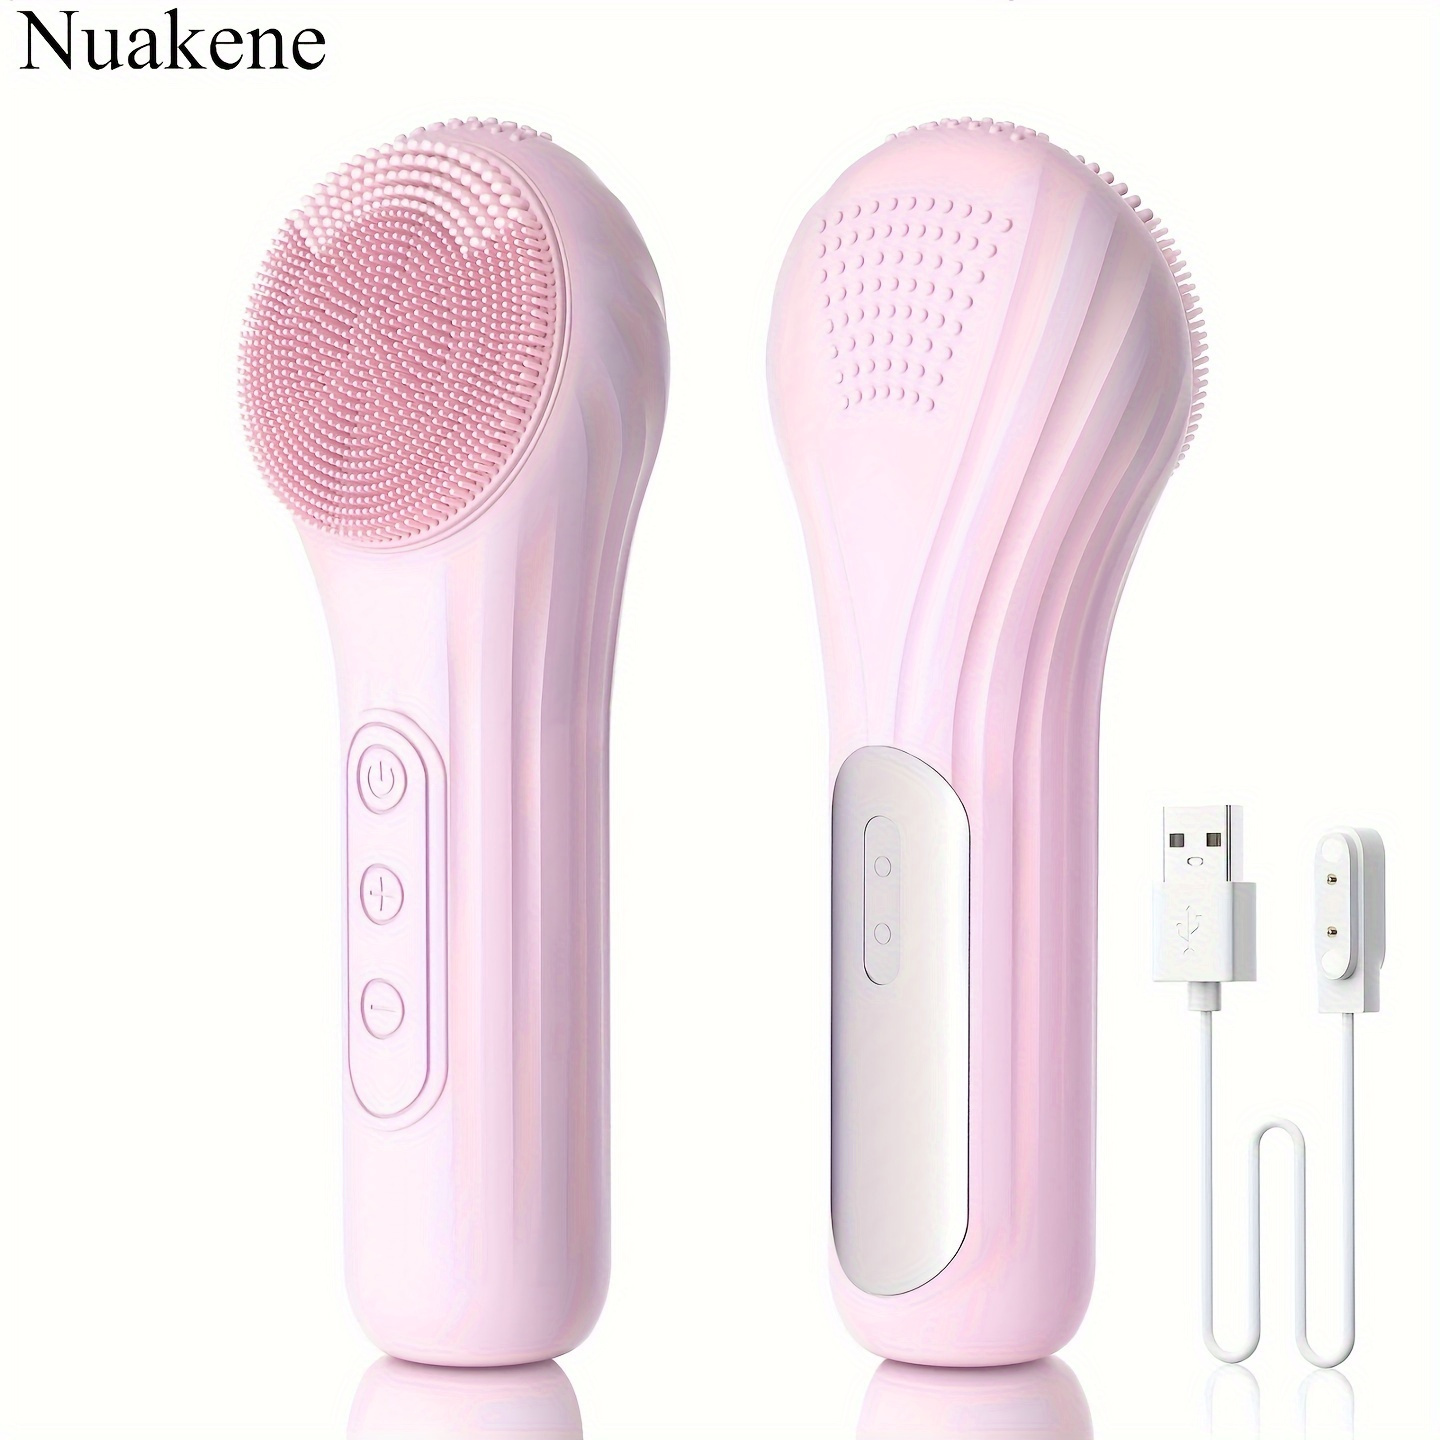 

Electric Facial Cleanser Brush, Silicone Scrubber, Wash Brush For Men & Women, Rechargeable Constant Temperature Heating Vibration Massage Cleansing Brush For Pore Cleansing Exfoliating Removal